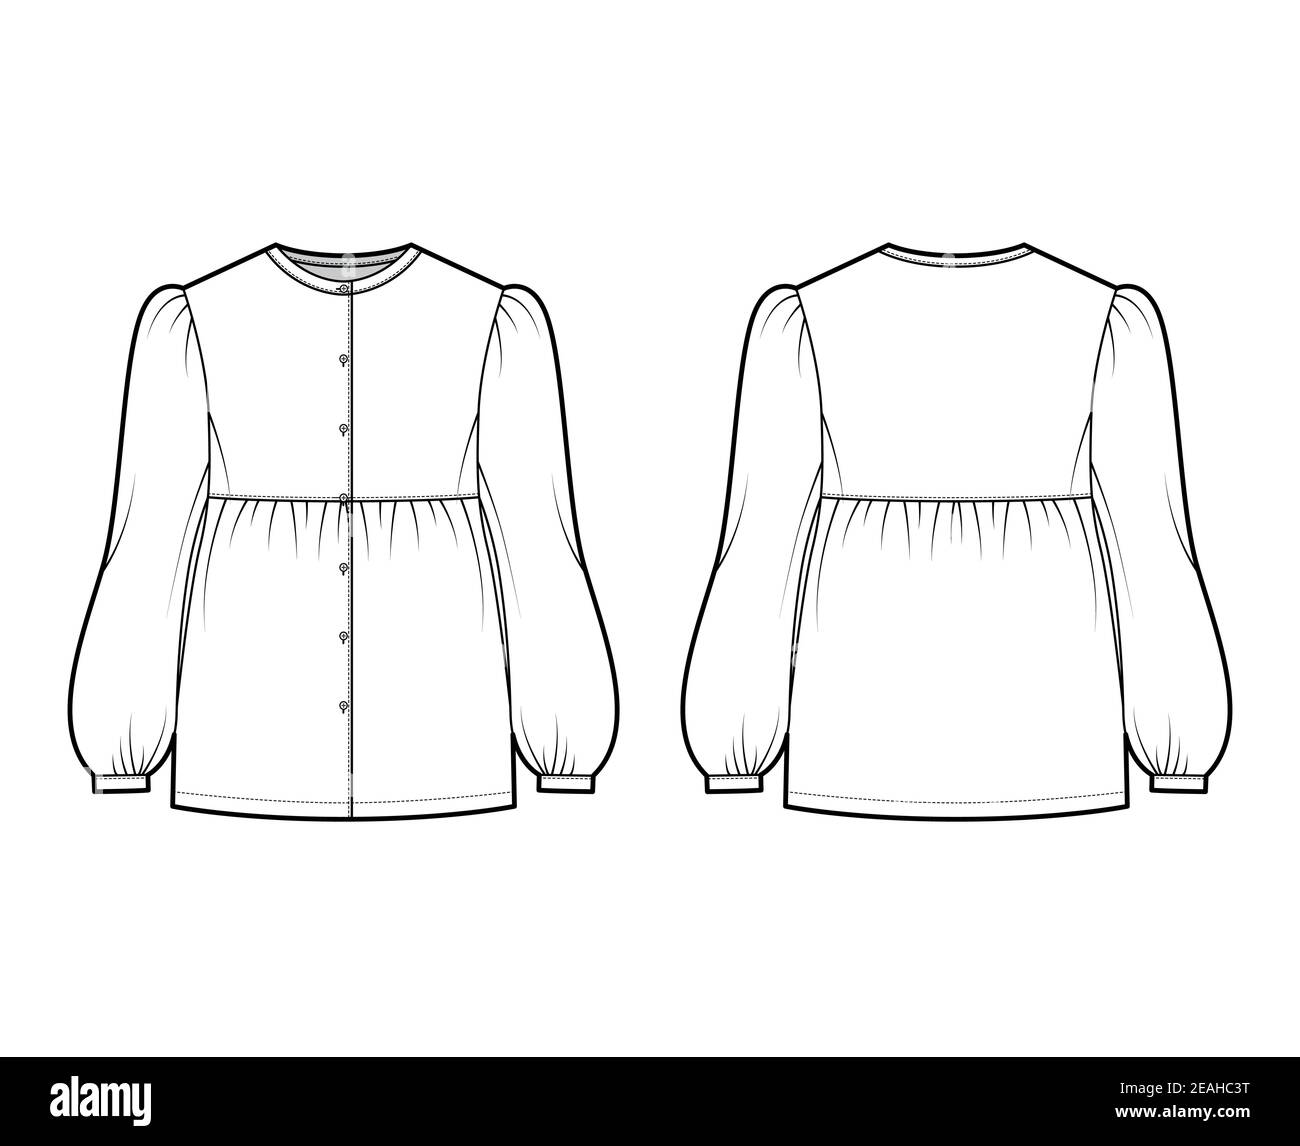 Tunic blouse technical fashion illustration with bouffant long sleeves ...